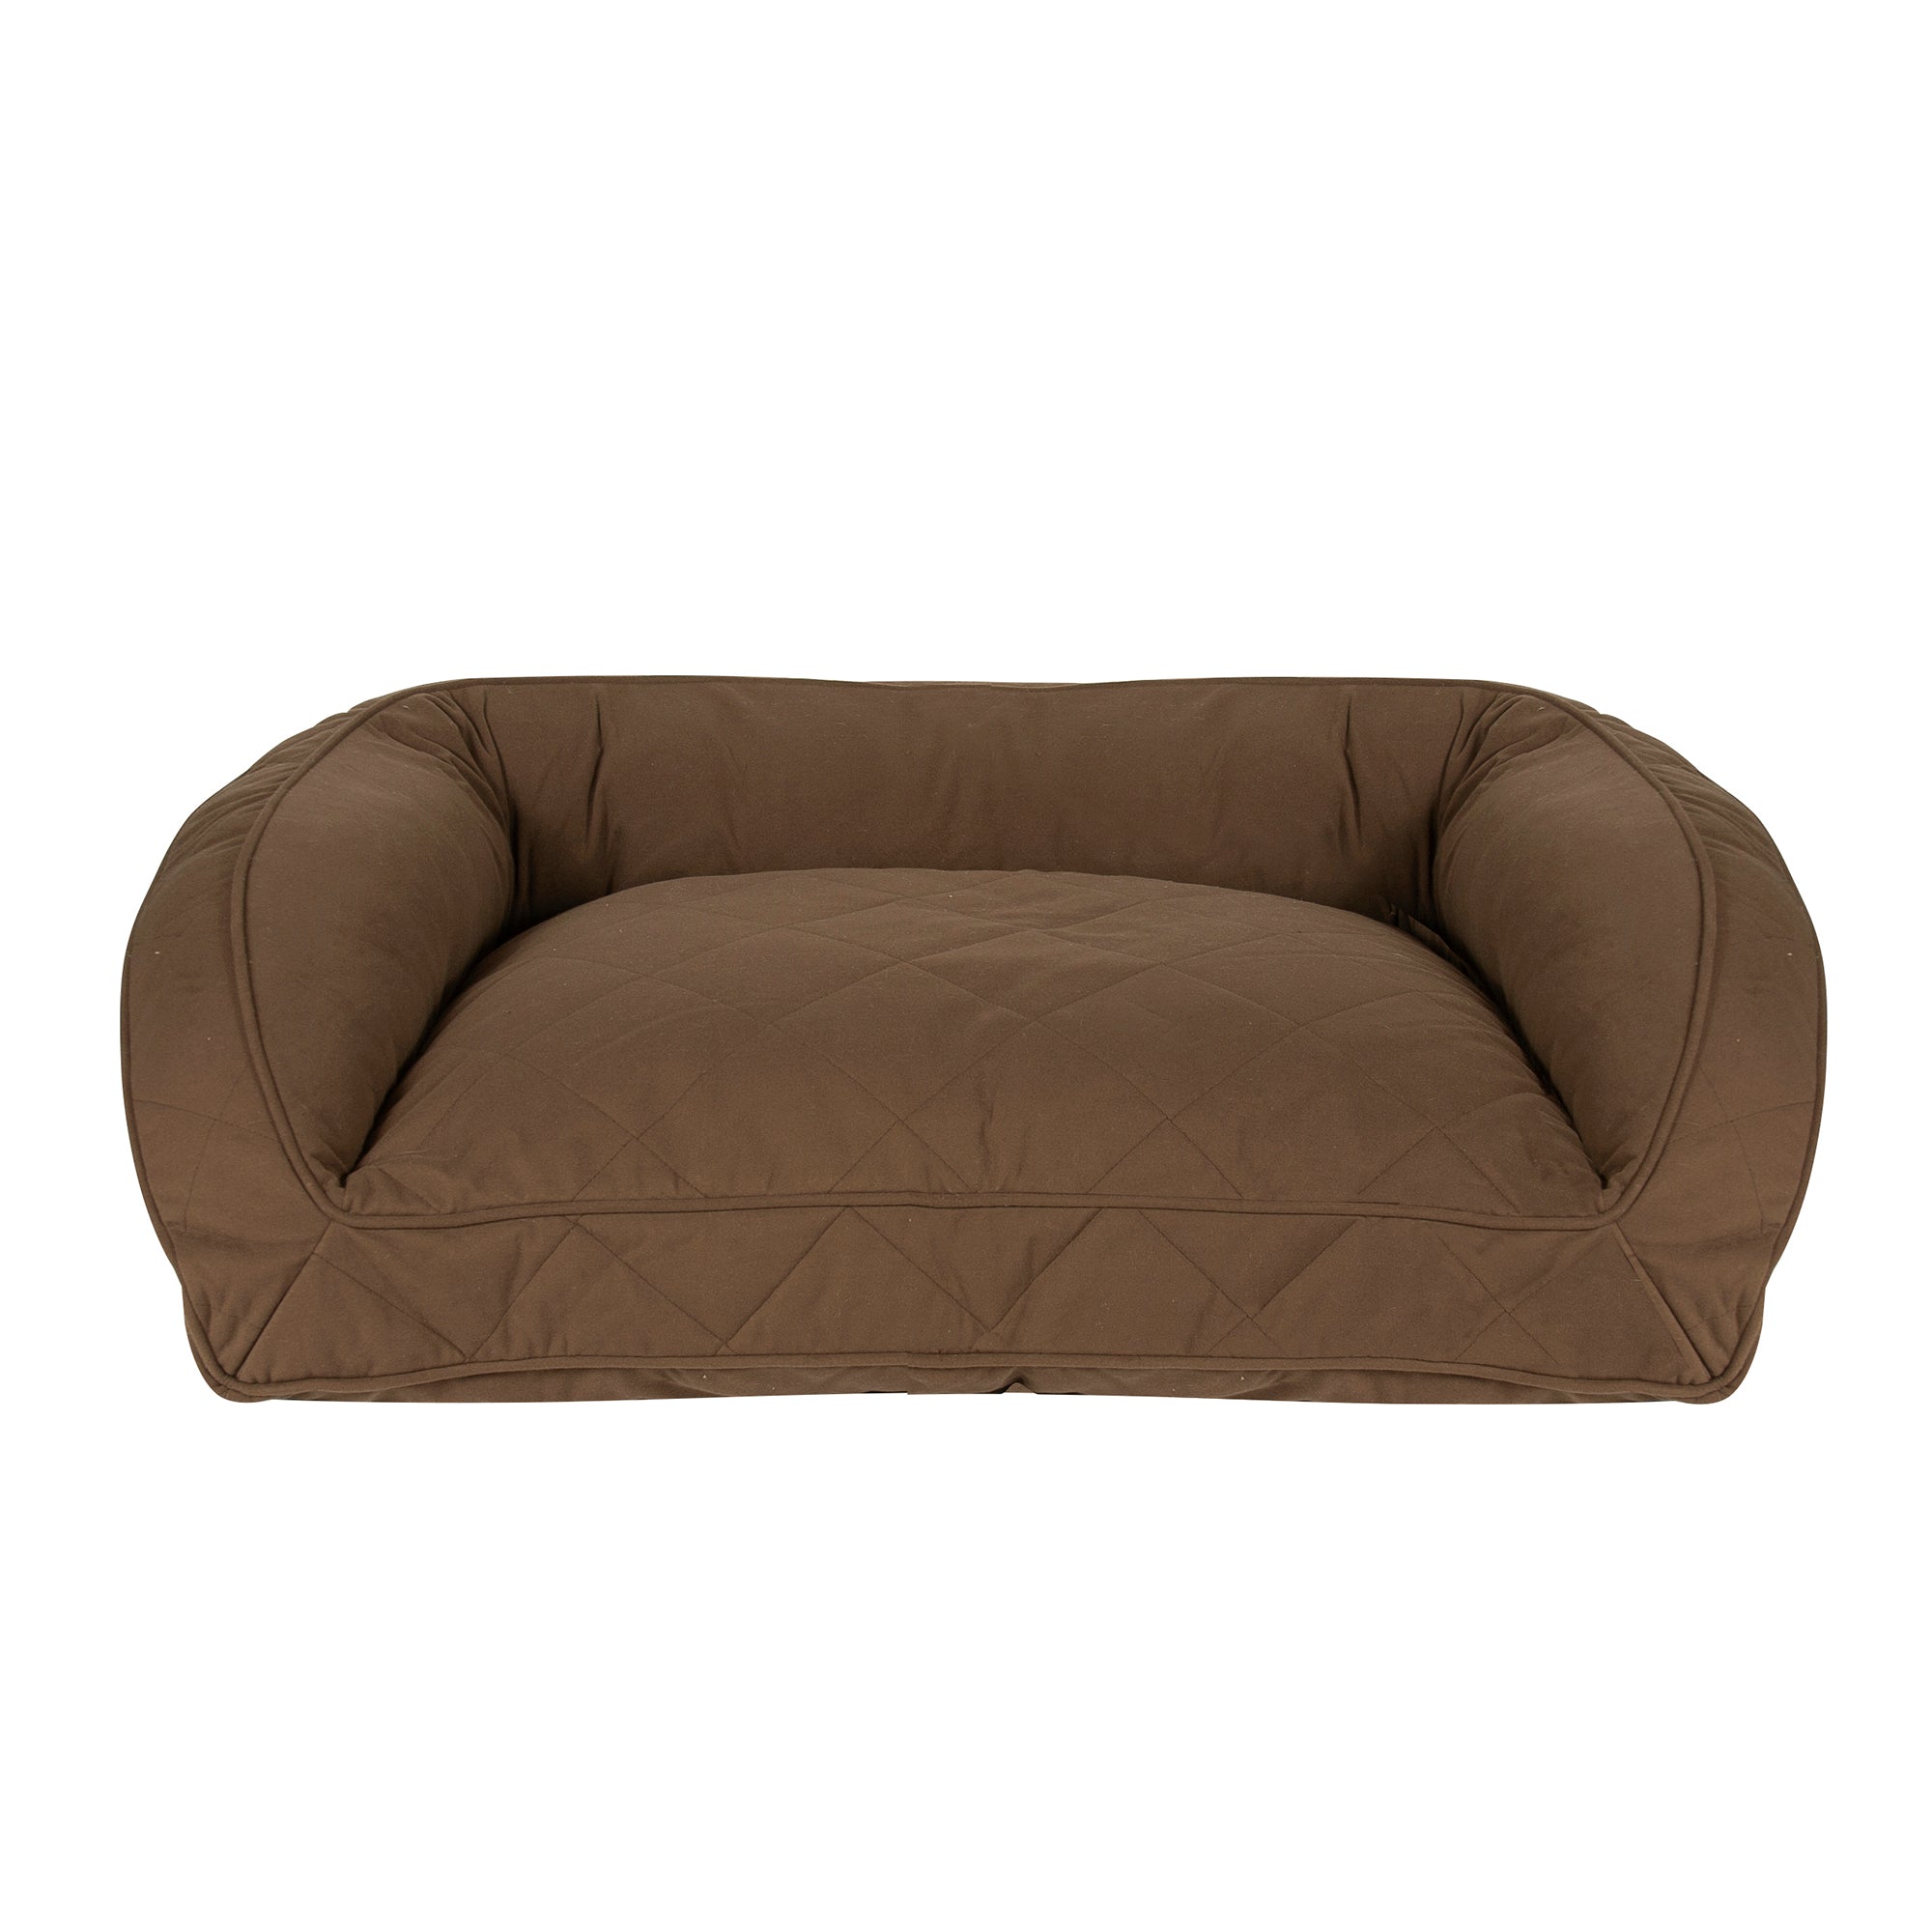 QUILTED-MICROFIBER-ORTHOPEDIC-DOG-BED-CHOCOLATE